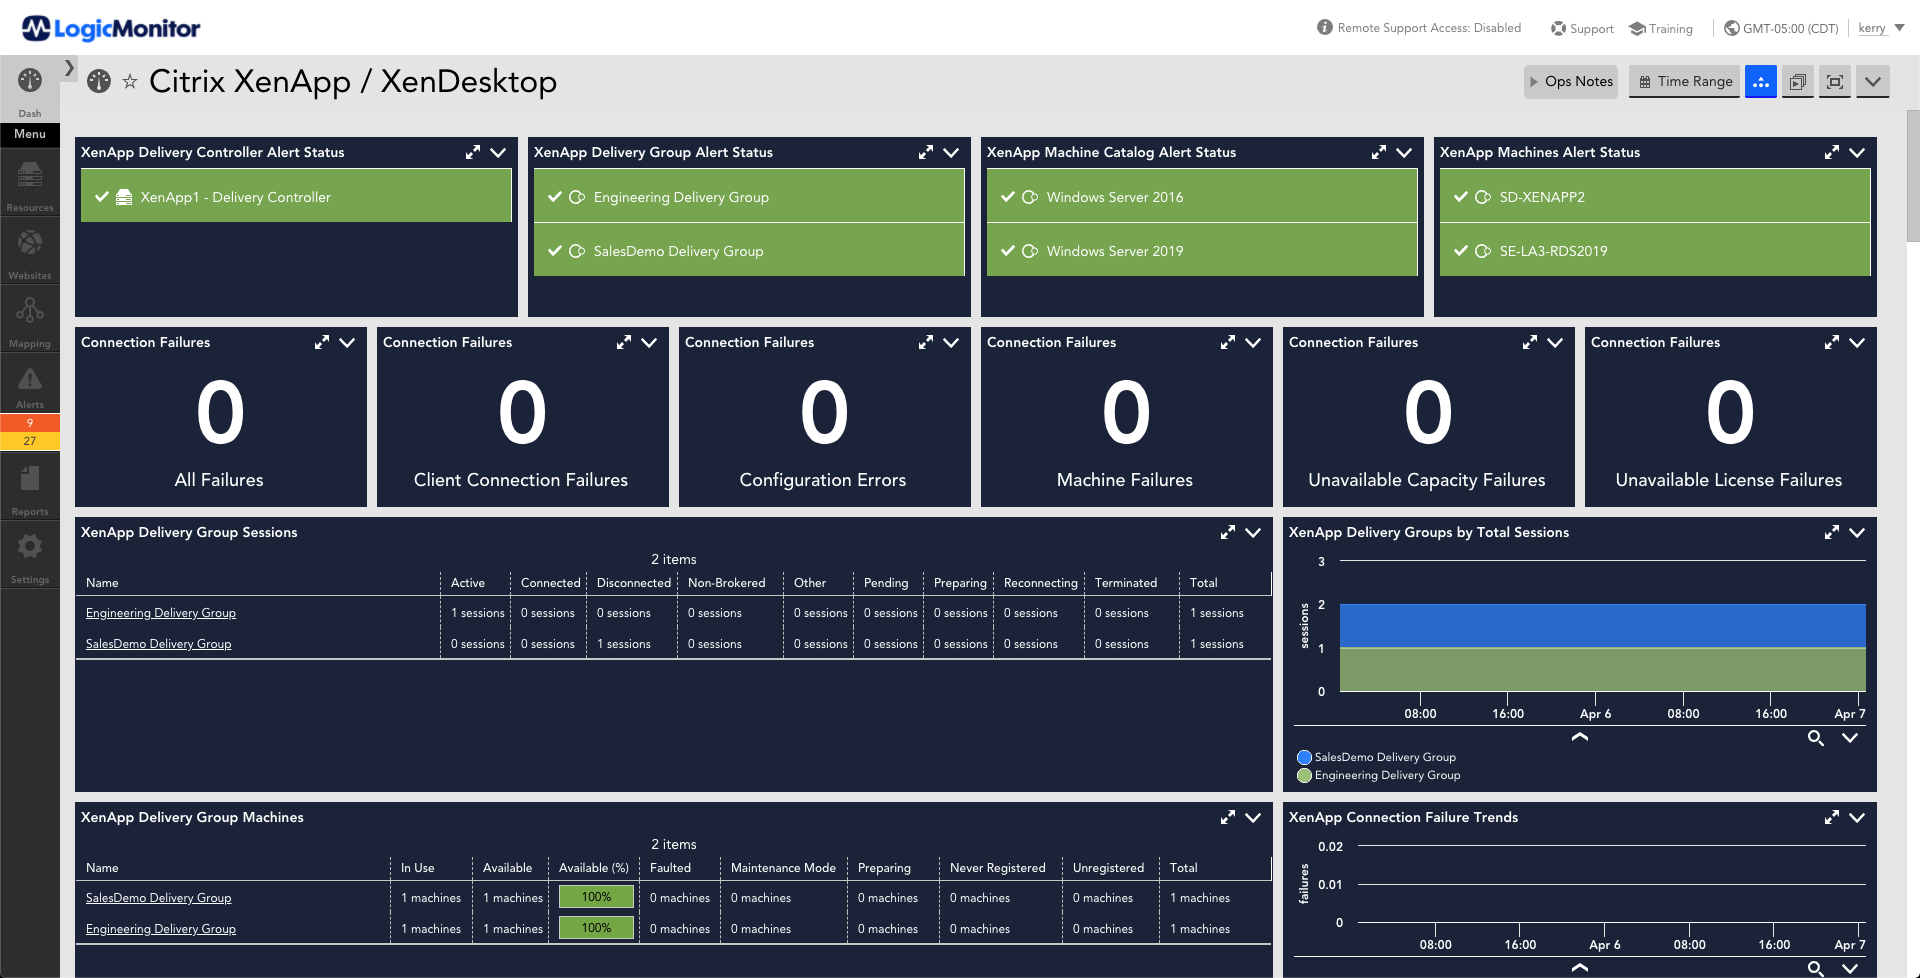 This dashboard provides status of Citrix XenApp / Xendesk applications. The metrics displayed are alert status, connection failure, delivery group sessions, delivery group sessions over time, delivery group machines, connection failure over time.